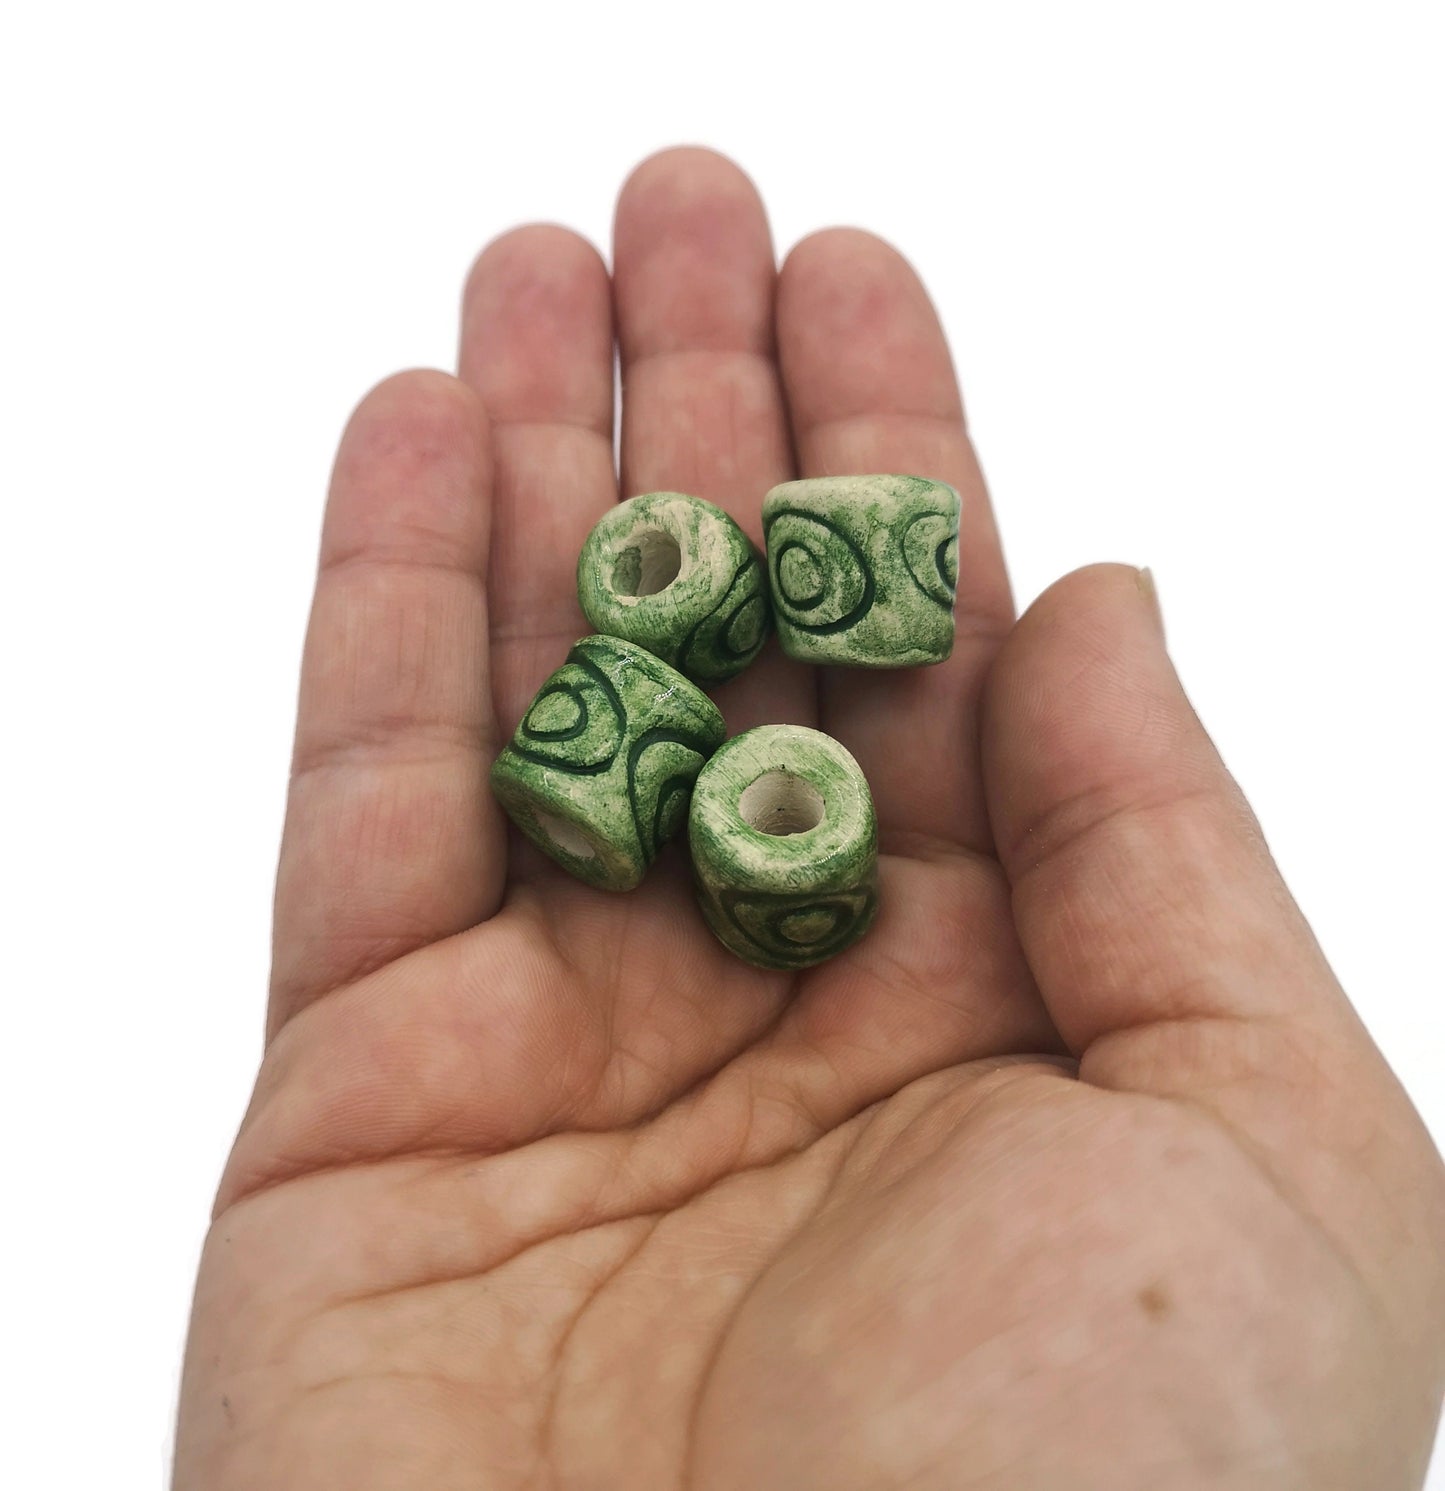 4Pc 15mm Green Macrame Tube Beads Large Hole, Barrel Beads For Jewelry Making, Handmade Ceramic Beads For Decorating Or Crafting, Clay Beads - Ceramica Ana Rafael